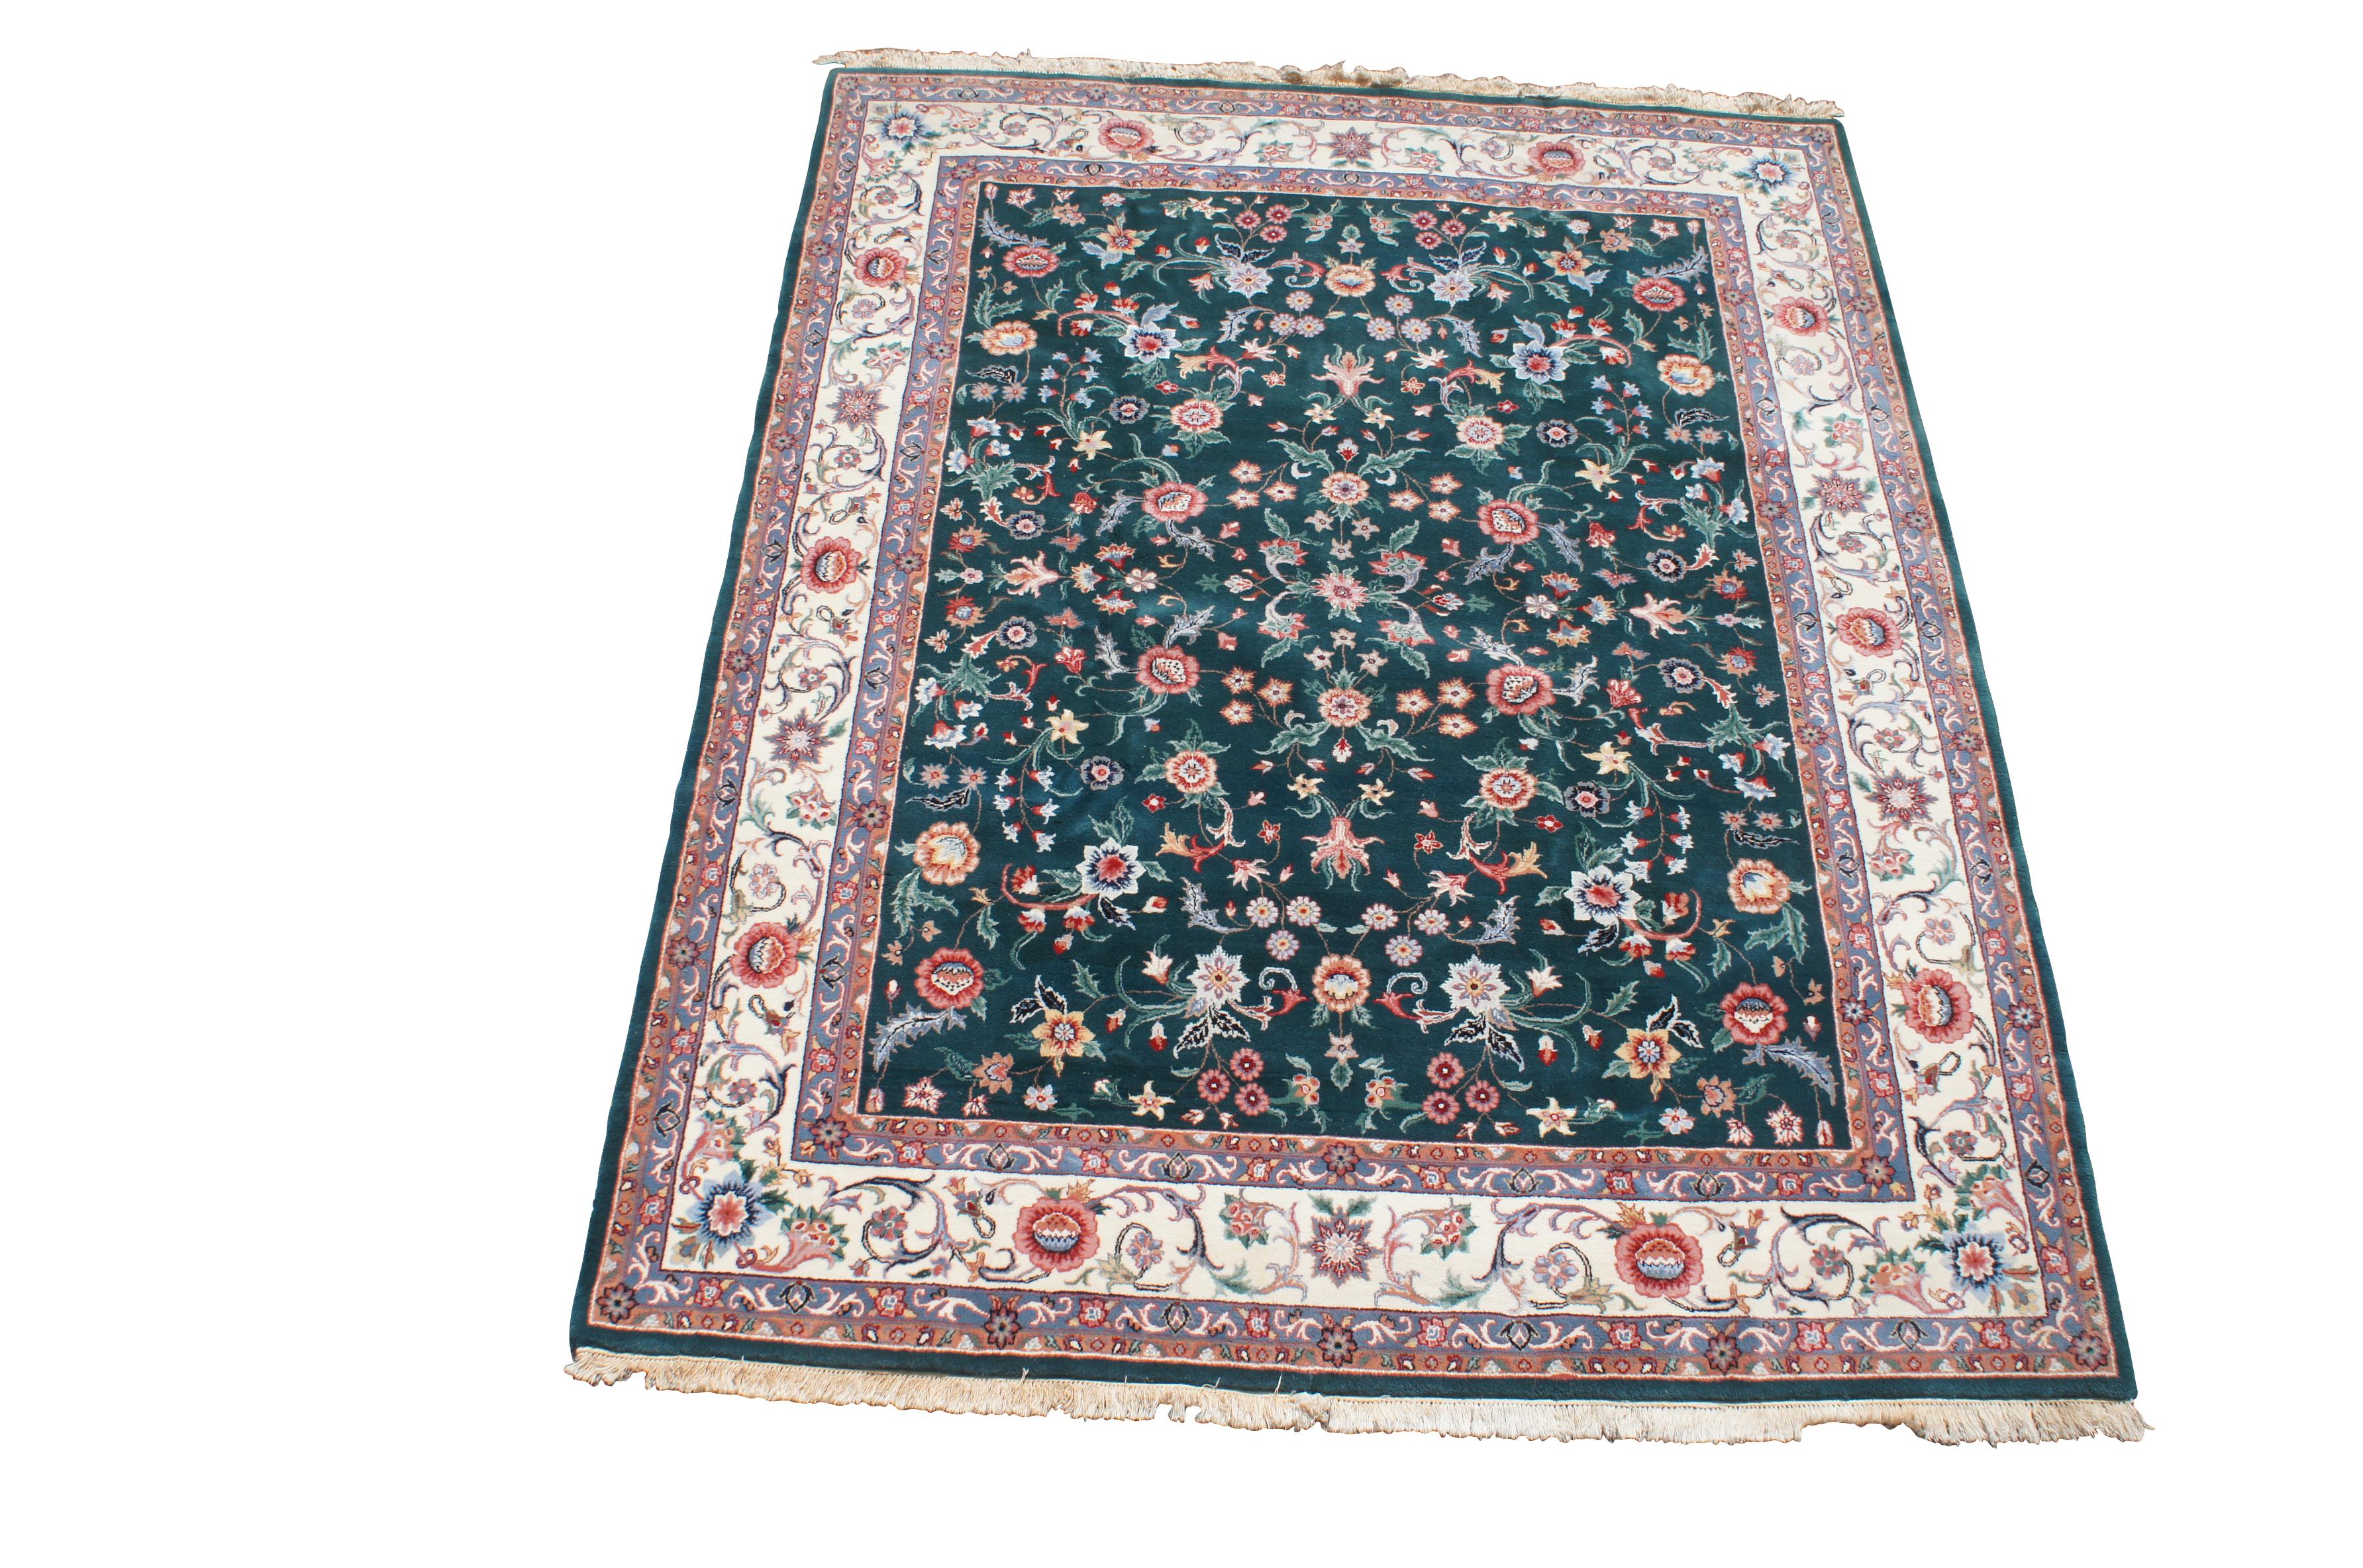 Vintage Teal & Ivory floral all over rug. Features a vibrant design with shades of green, blue, red and salmon.  144 knots per square inch.

Sino Tabriz rugs are known for their high quality weave and adherence to traditional Persian rug design.